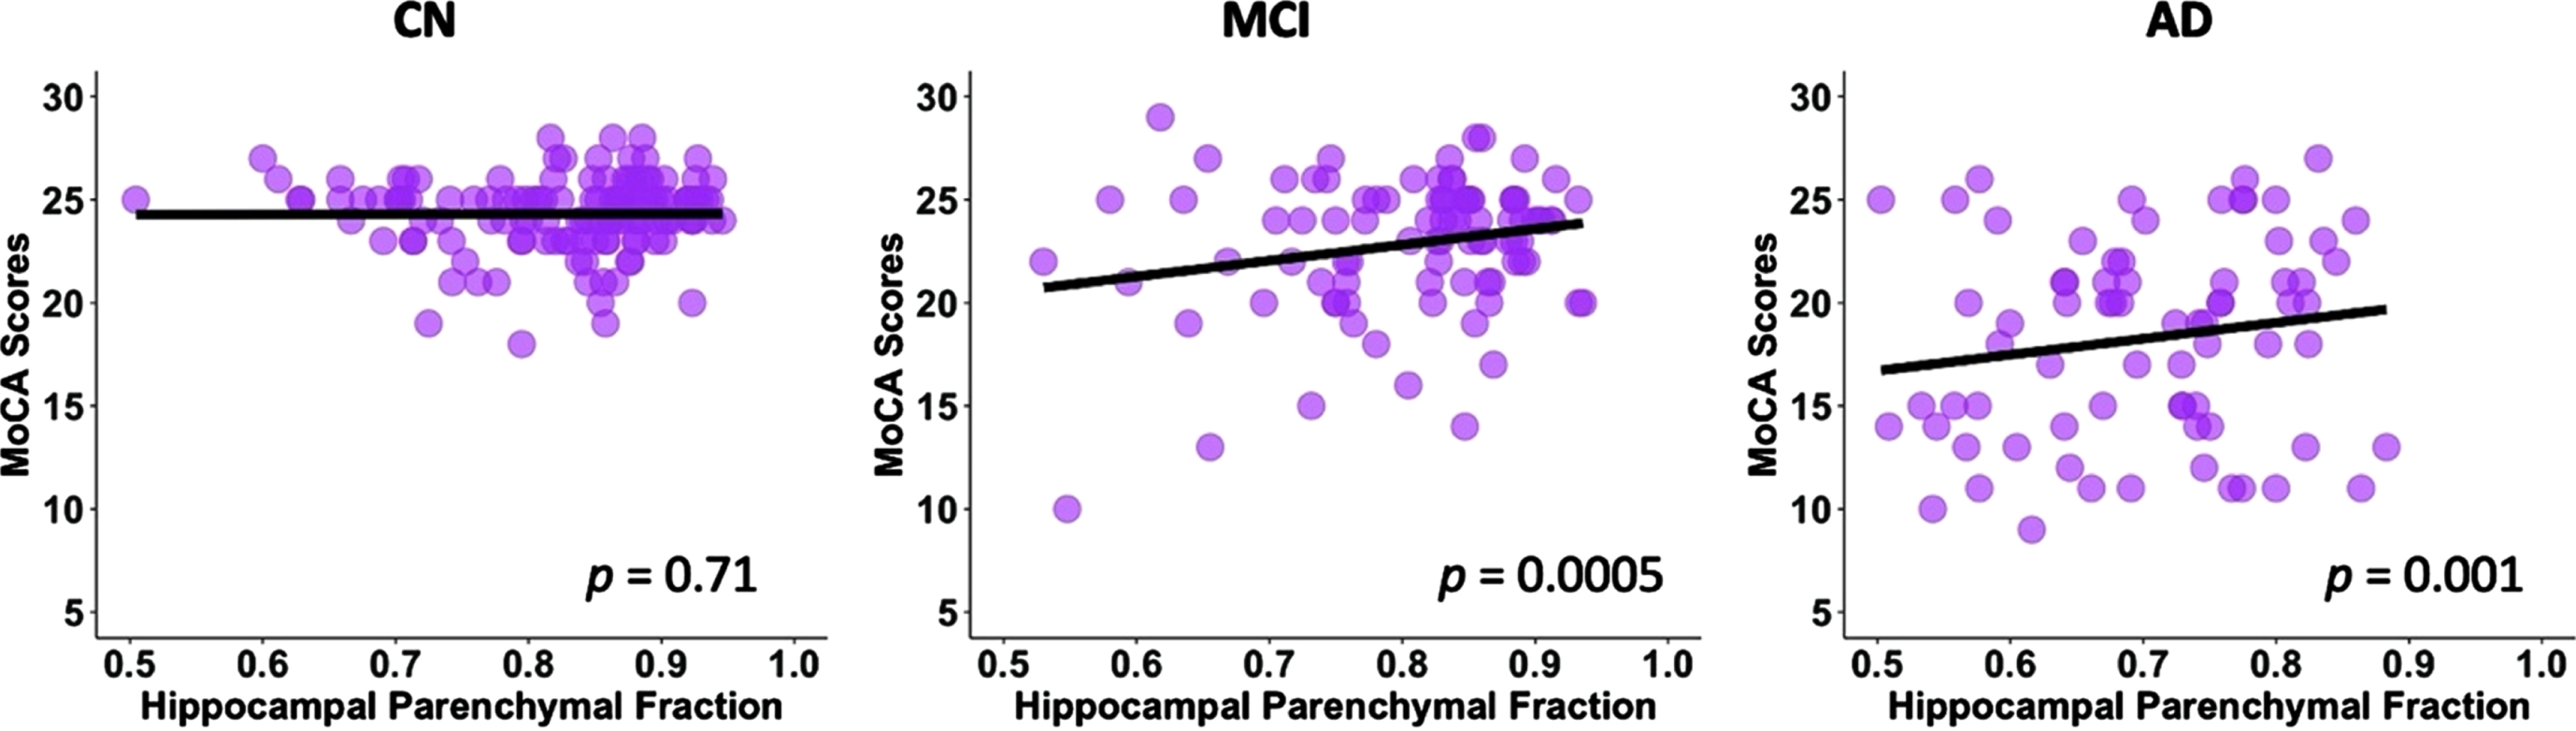 Linear regression model fitted plots between the hippocampal parenchymal fraction and MoCA scores in CN, MCI, and AD groups. Significant associations are found in the MCI (p = 0.0005) and AD (p = 0.001) groups but not in CN group (p = 0.71). The p values are from the post-hoc regression analysis.